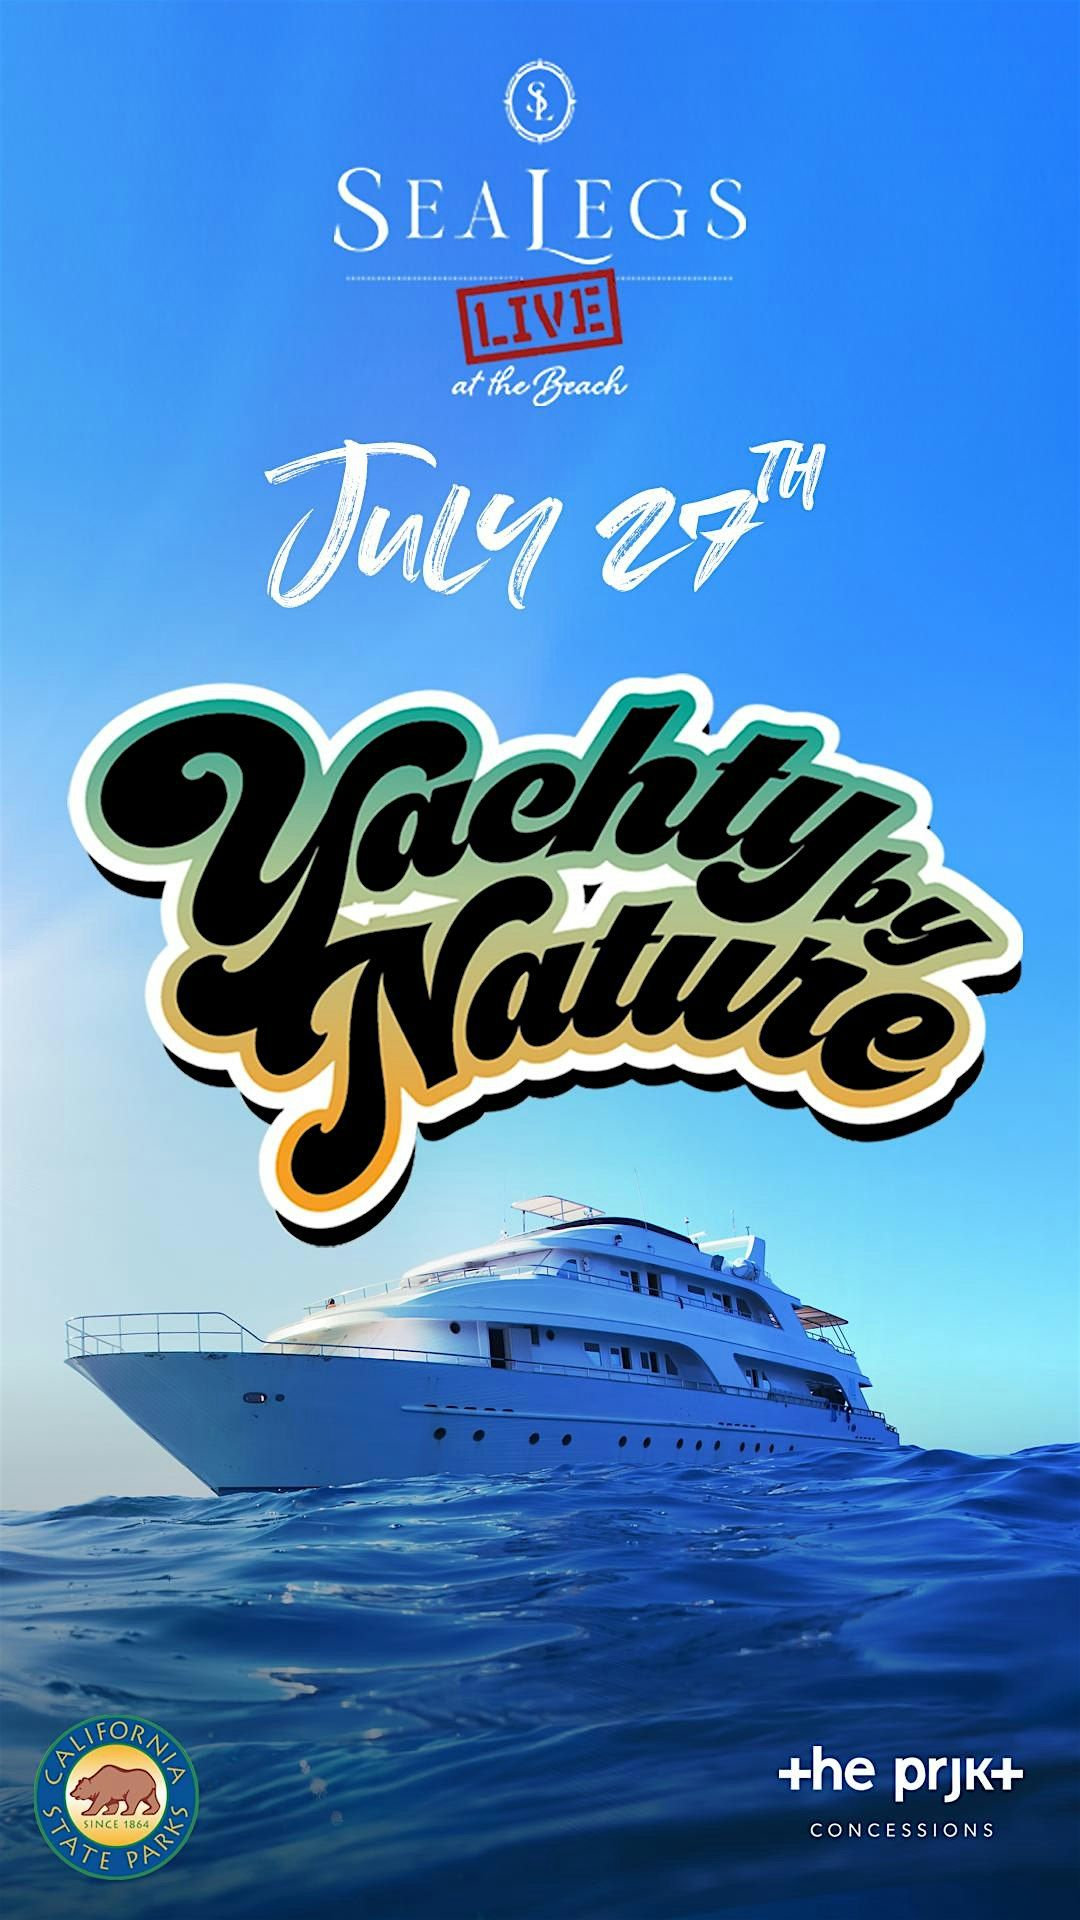 Yachty by Nature